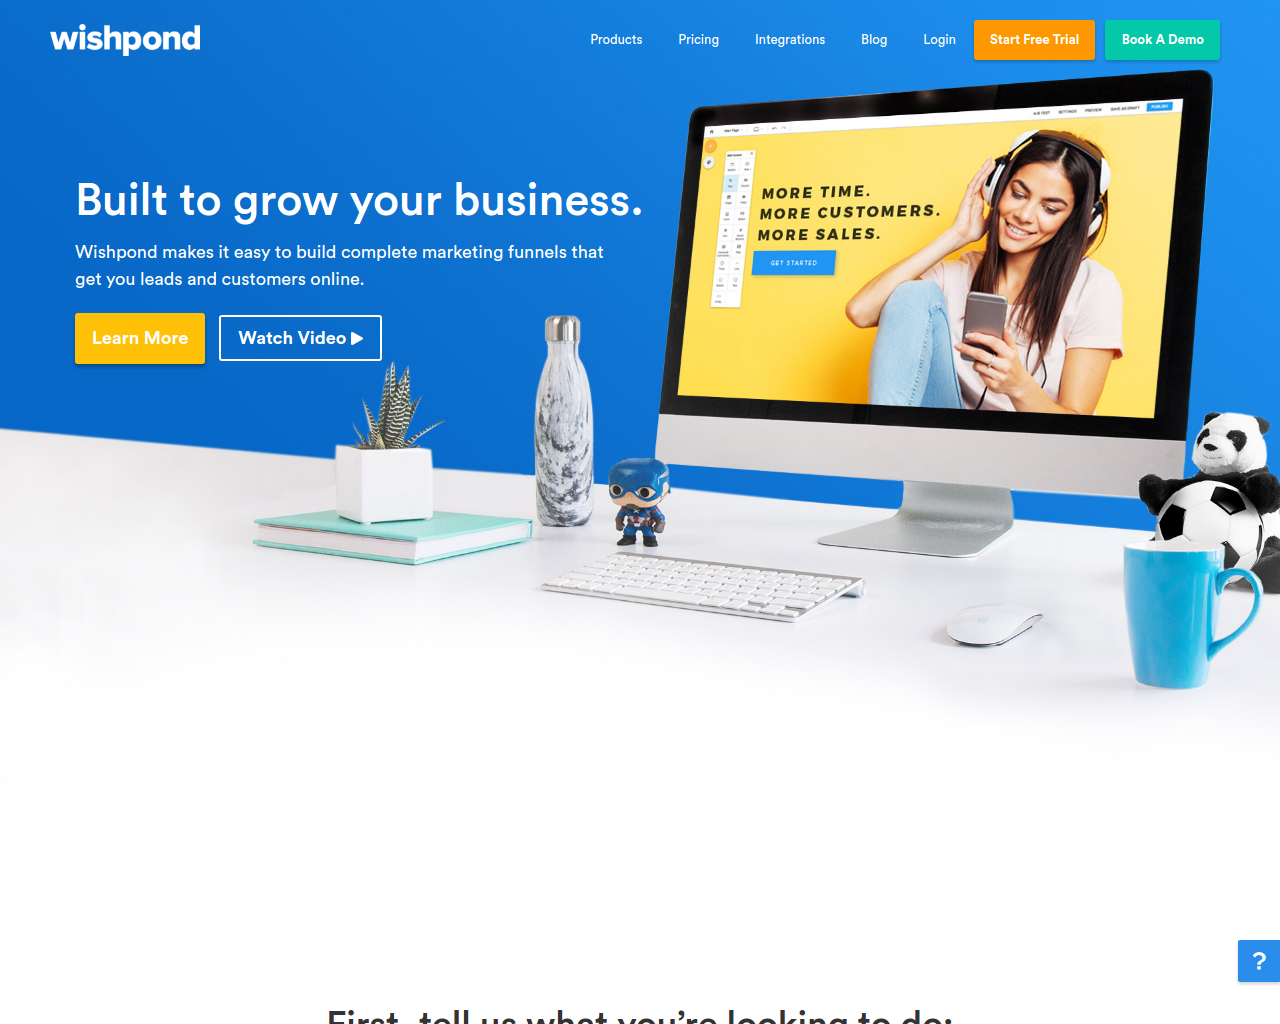 Cover photo of Wishpond